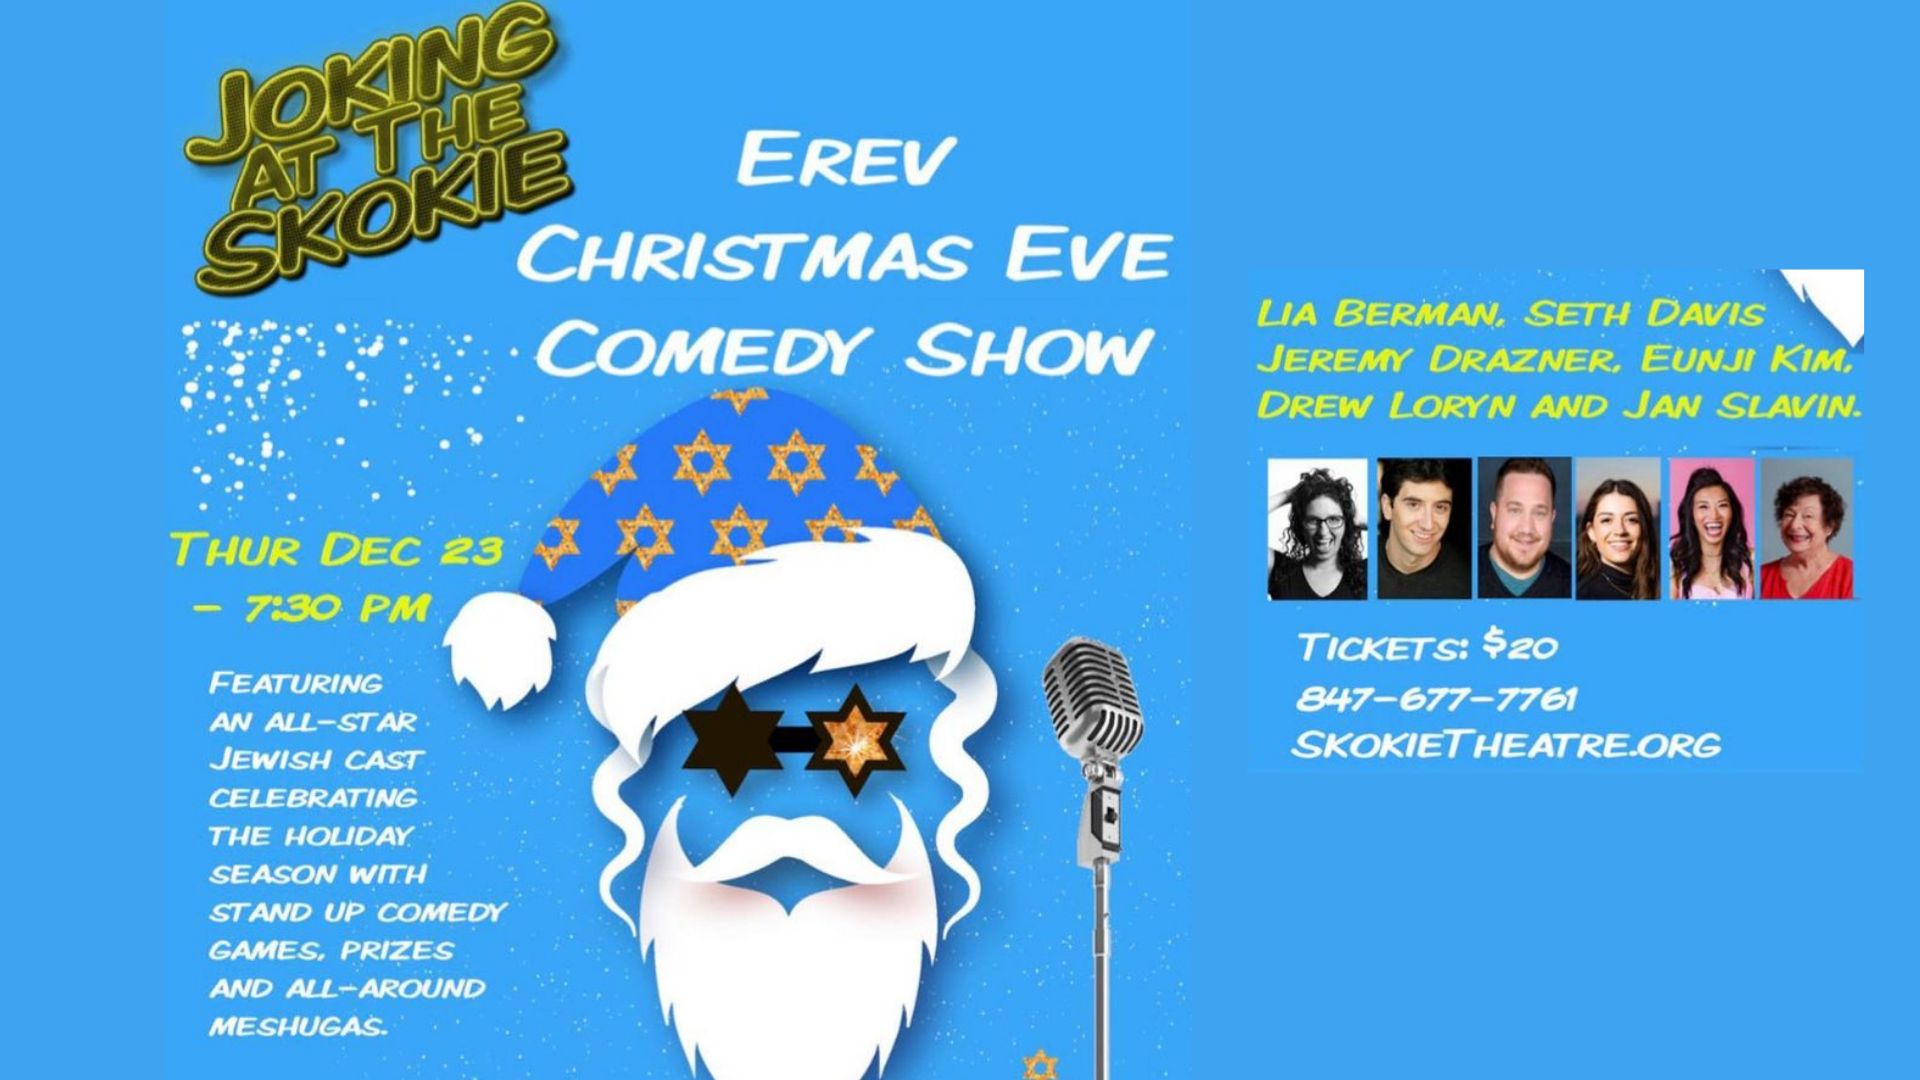 Joking at the Skokie: An Erev Christmas Eve Comedy Show!